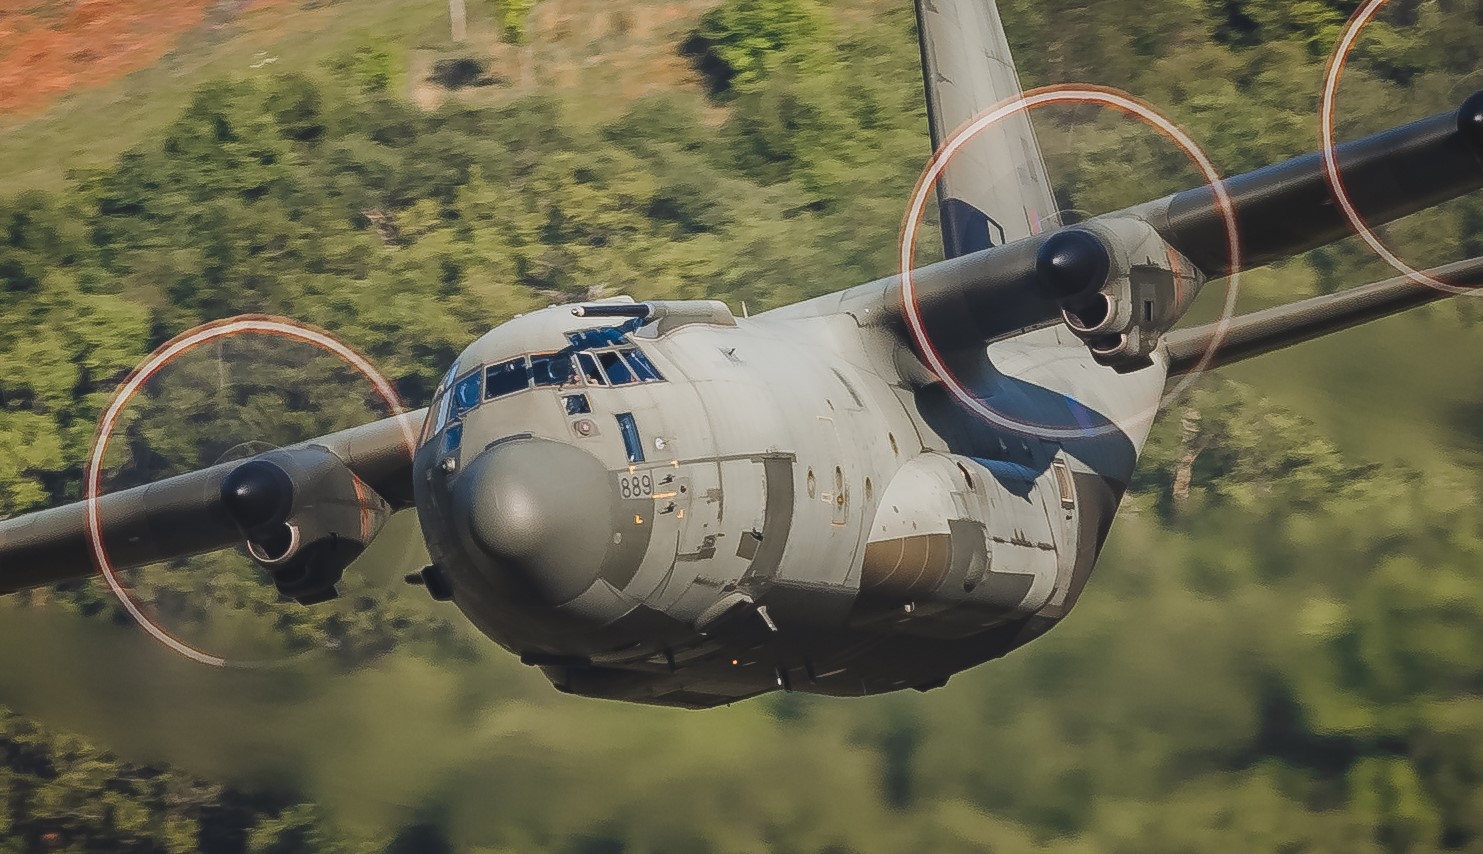 UK flypast to mark the retirement of the RAF Hercules